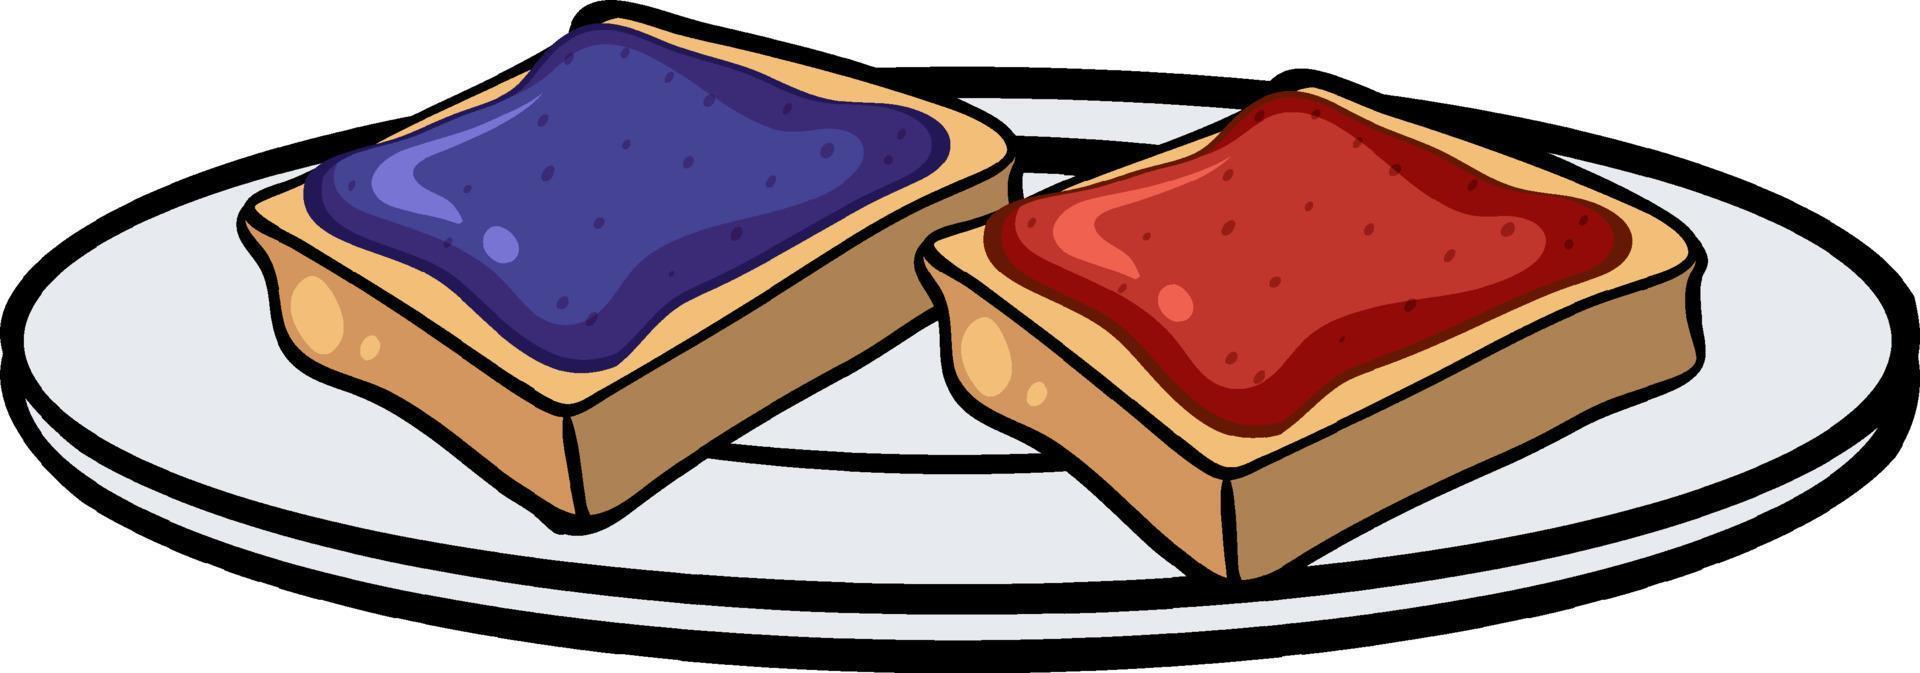 Two toasts with jam on the plate vector